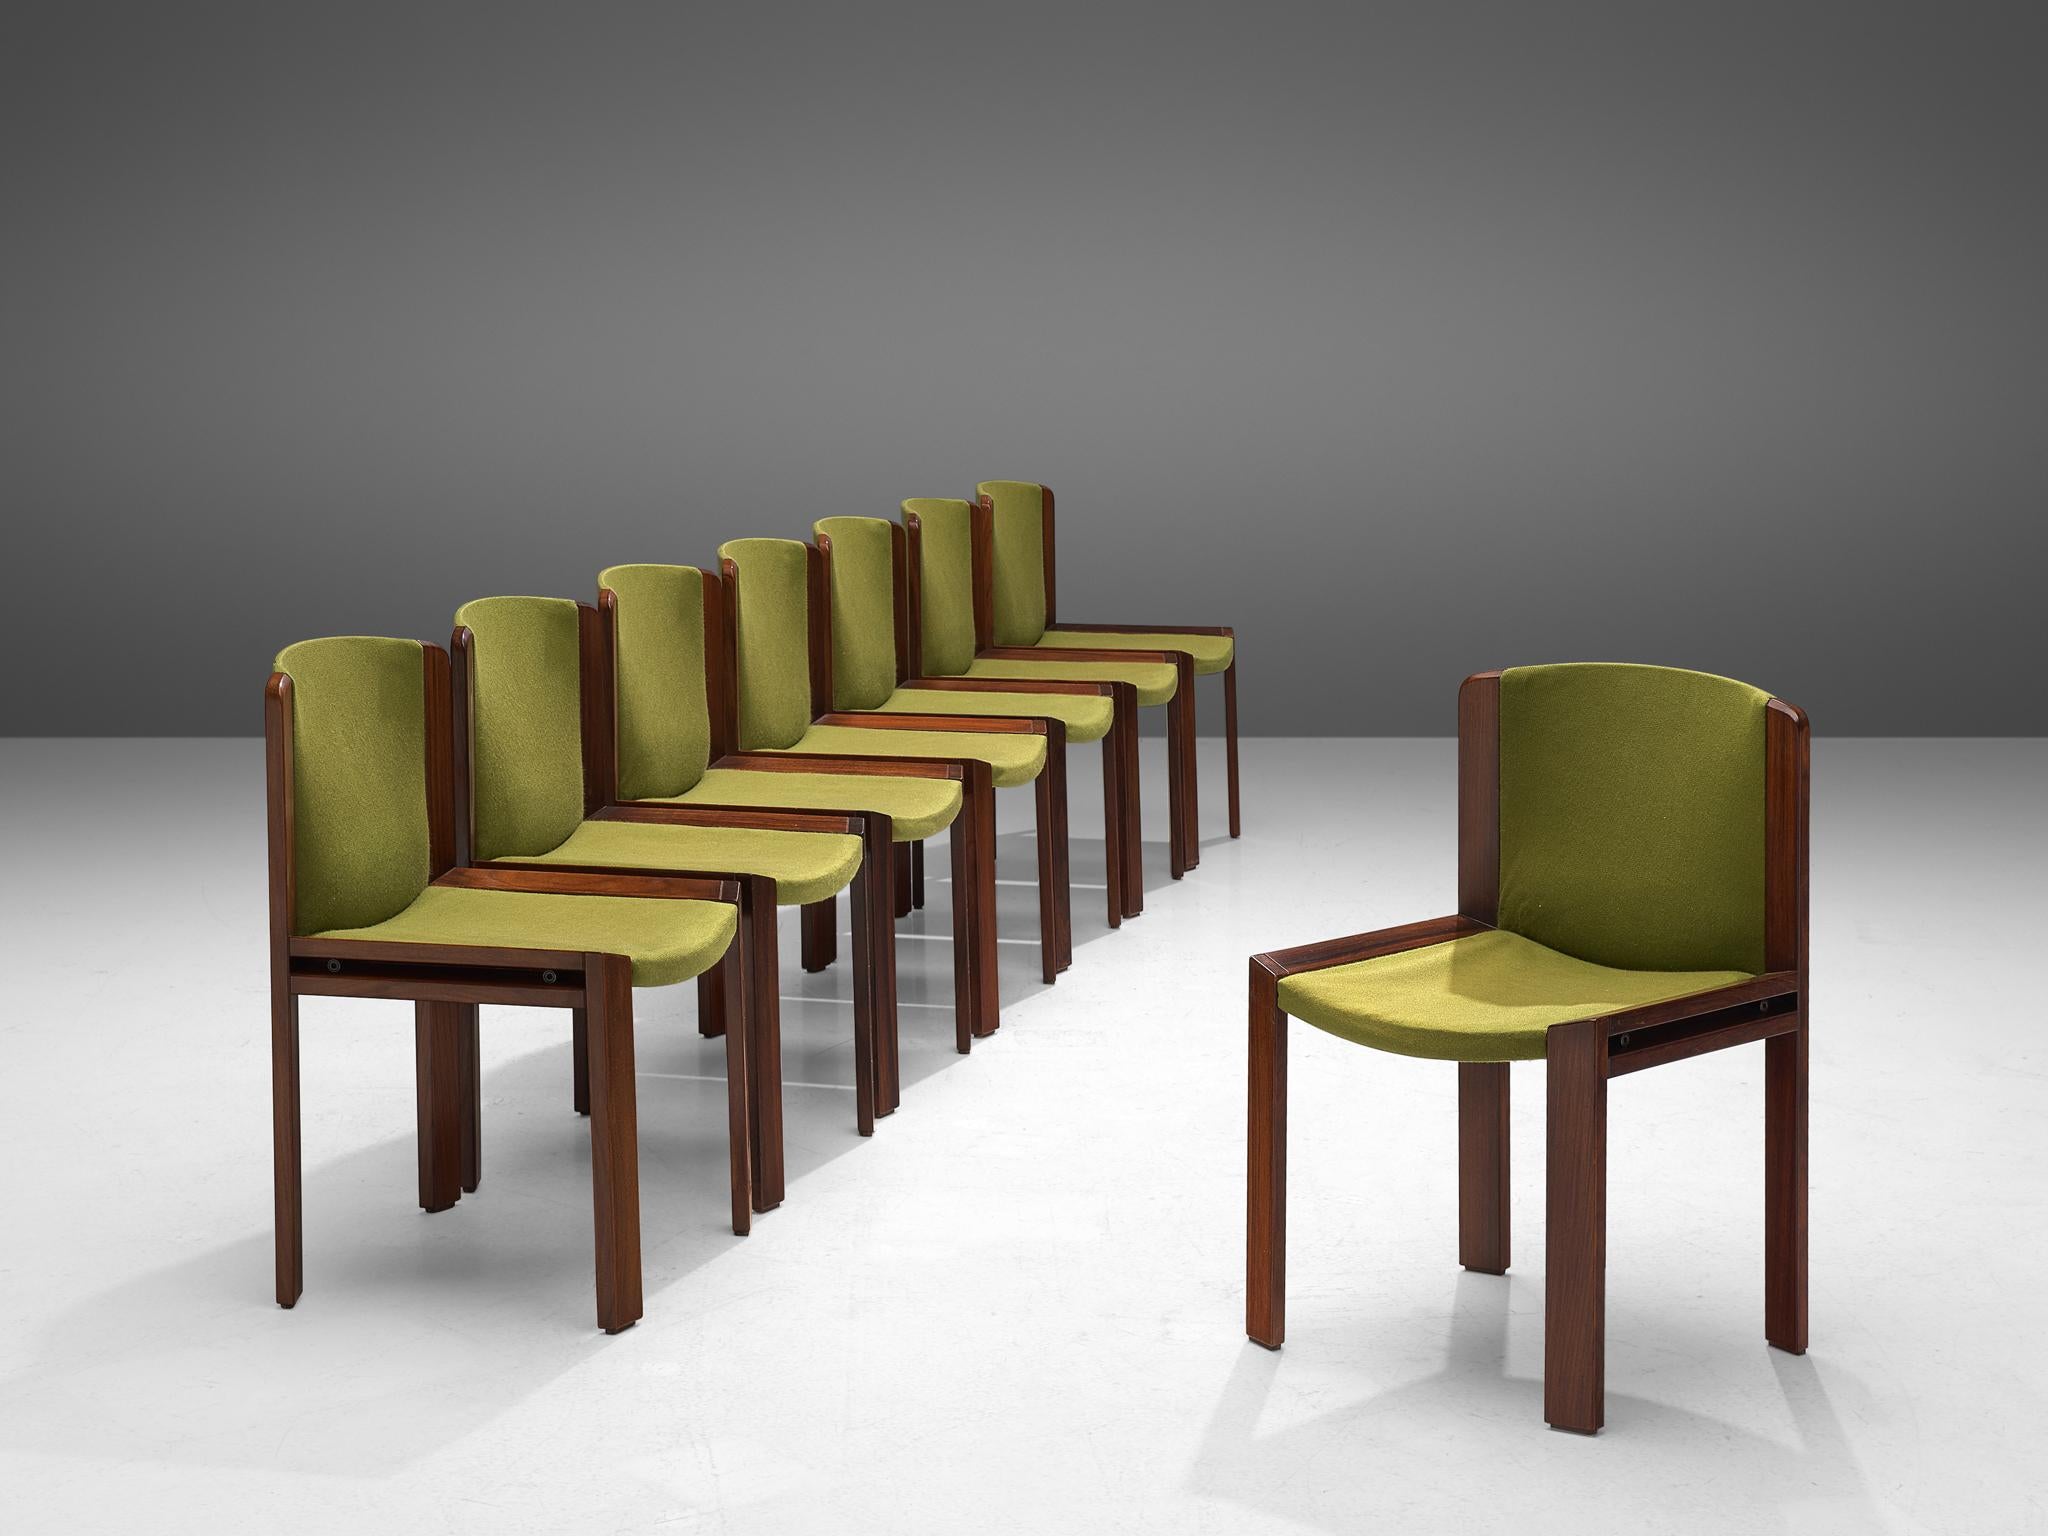 Joe Colombo for Pozzi, set of 8 dining chairs model '300', fabric and rosewood, Italy, 1966.

Functionalist set of dining chairs is designed by Joe Colombo in 1966. His fascination with functionality meant he always focused on the user, which lead